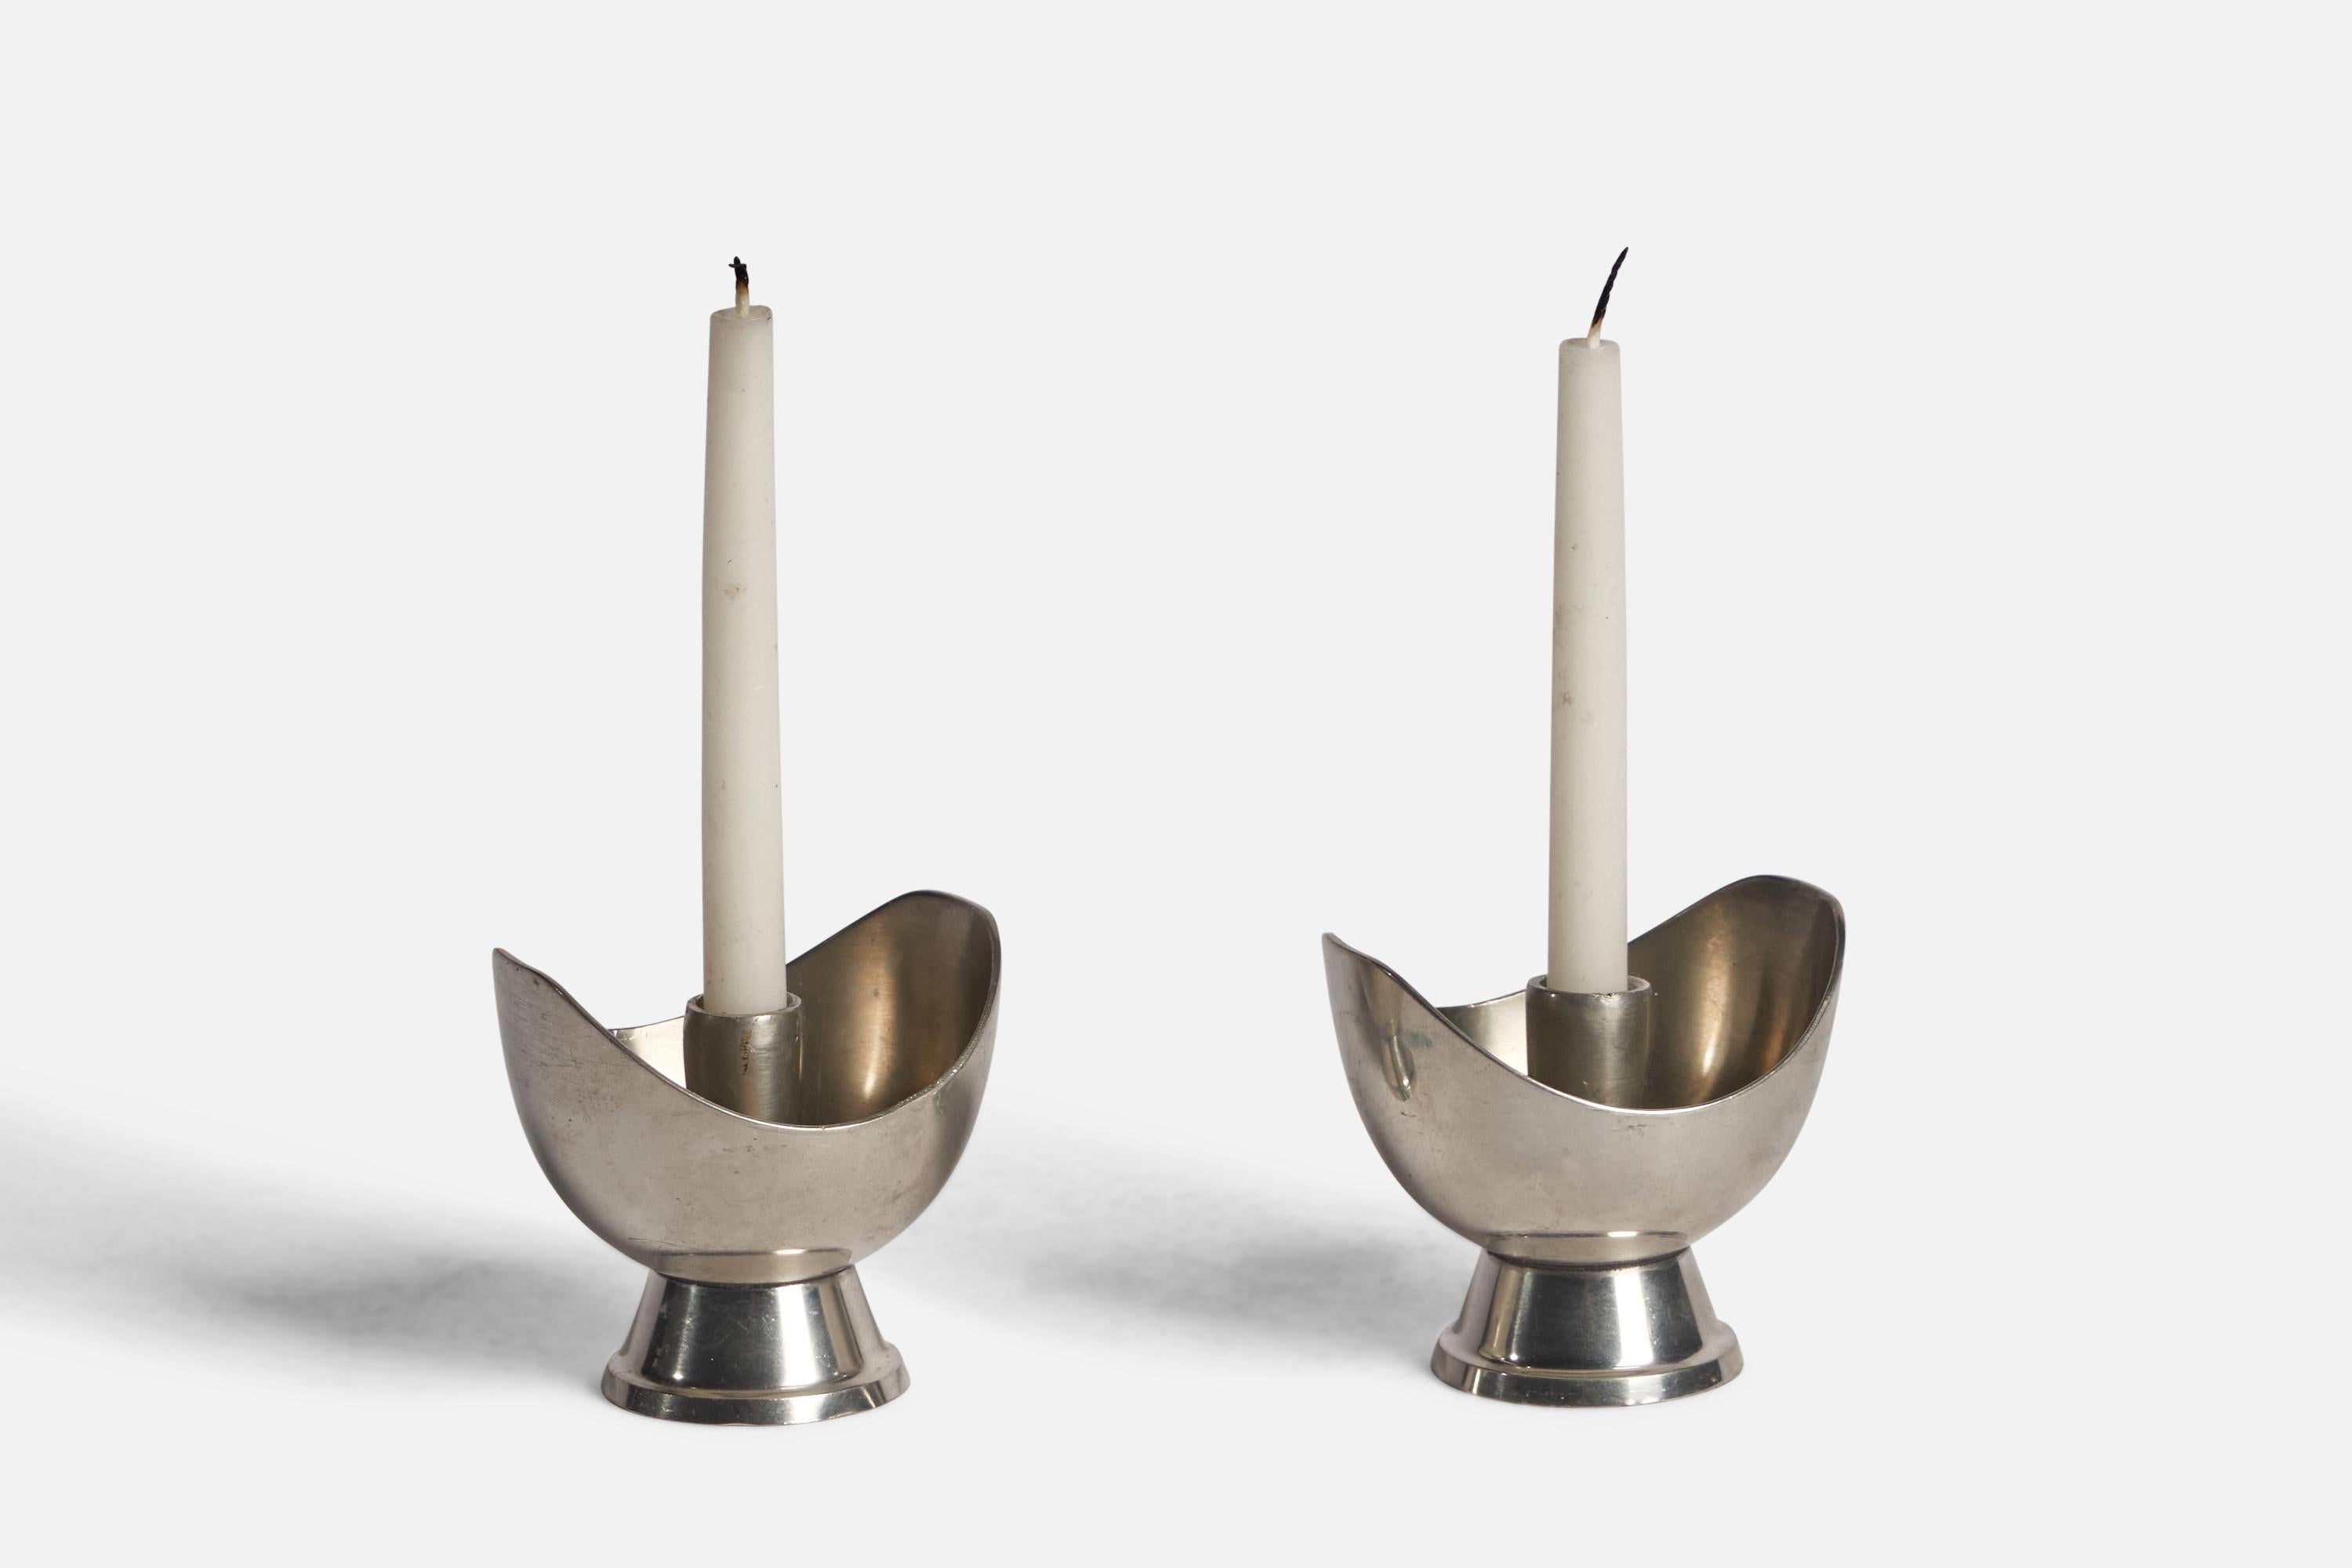 A pair of small pewter candlesticks designed and produced by GAB Guldsmedsaktiebolaget, Sweden, 1930s.

Holds 0.4” diameter candles
”P9 GAB TENN” stamp on bottom
 